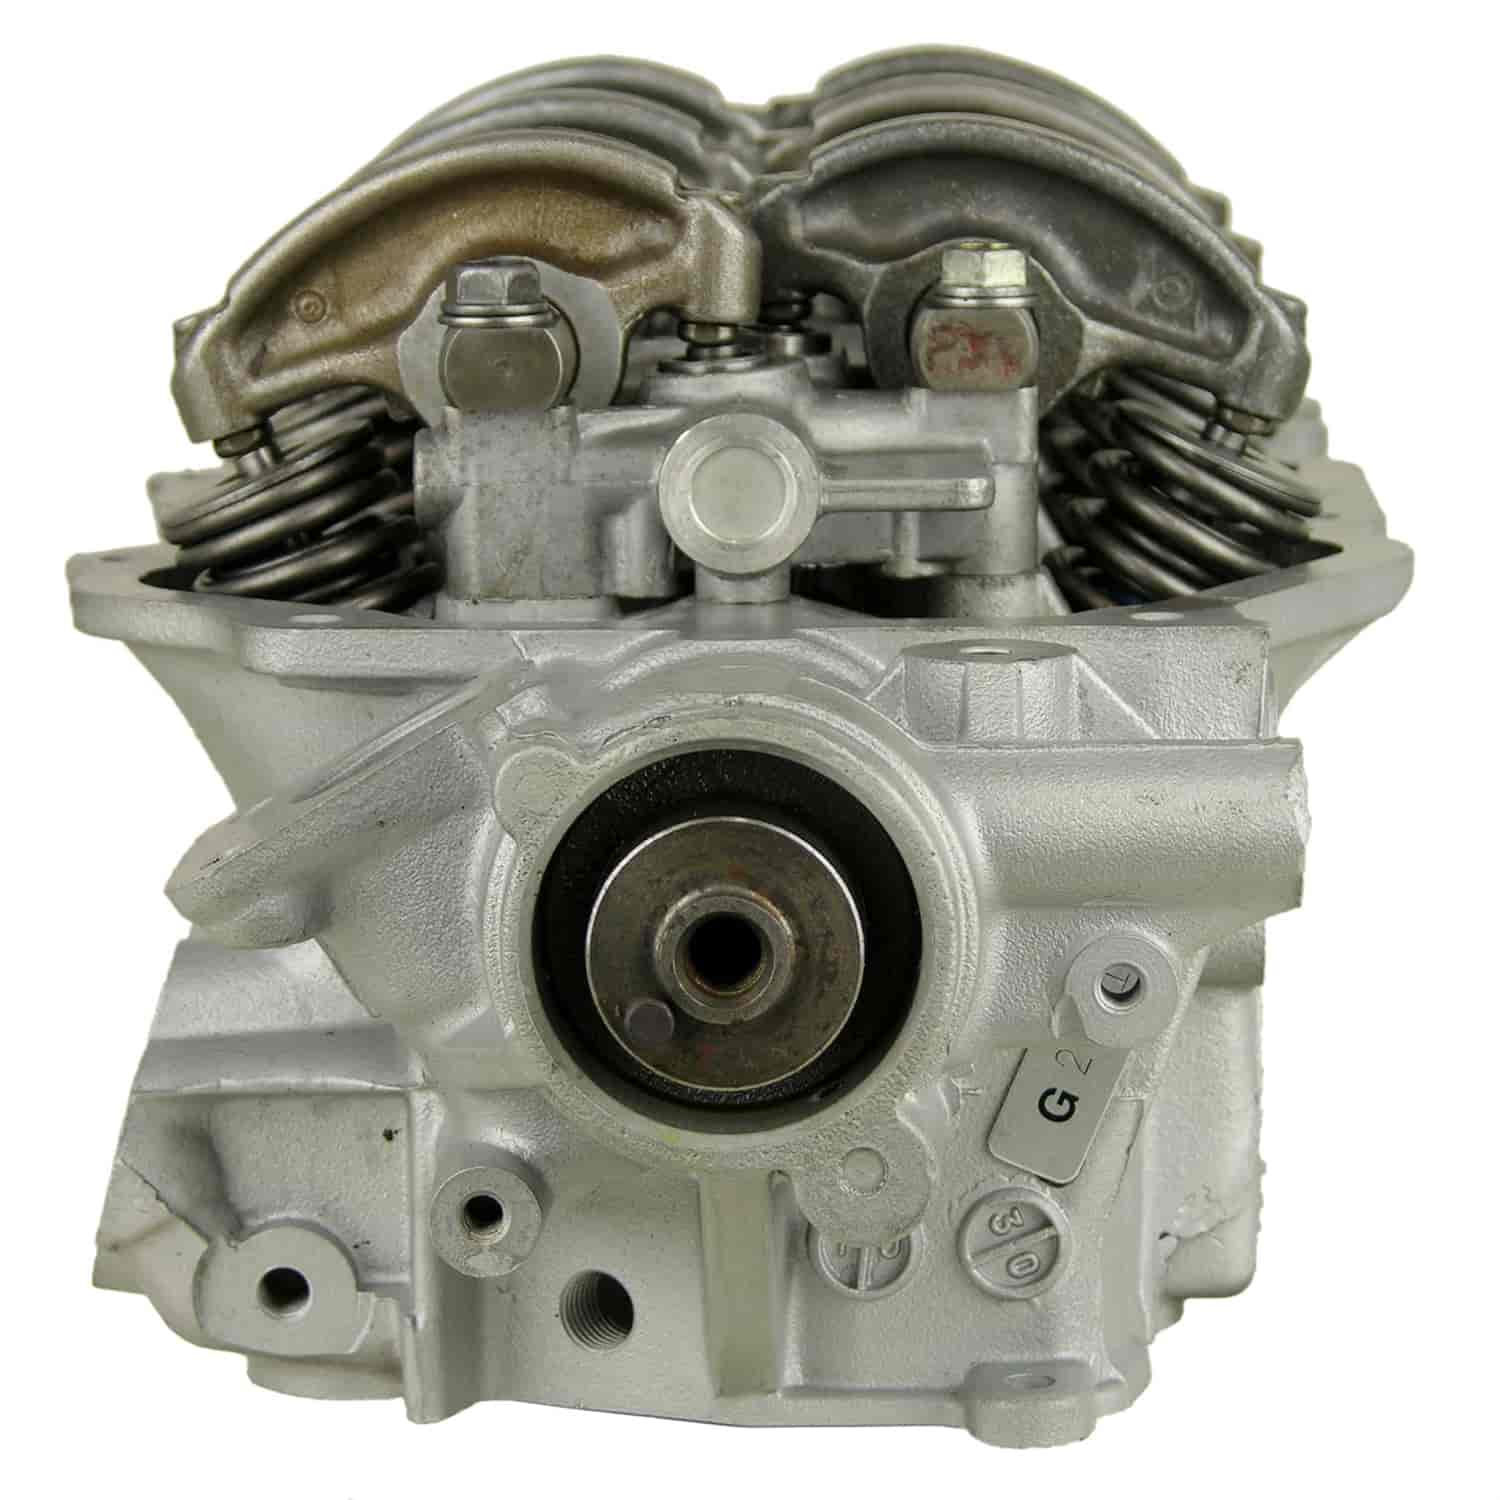 Remanufactured Cylinder Head for 1985-1996  Nissan/Infiniti with 3.0L V6 VG30